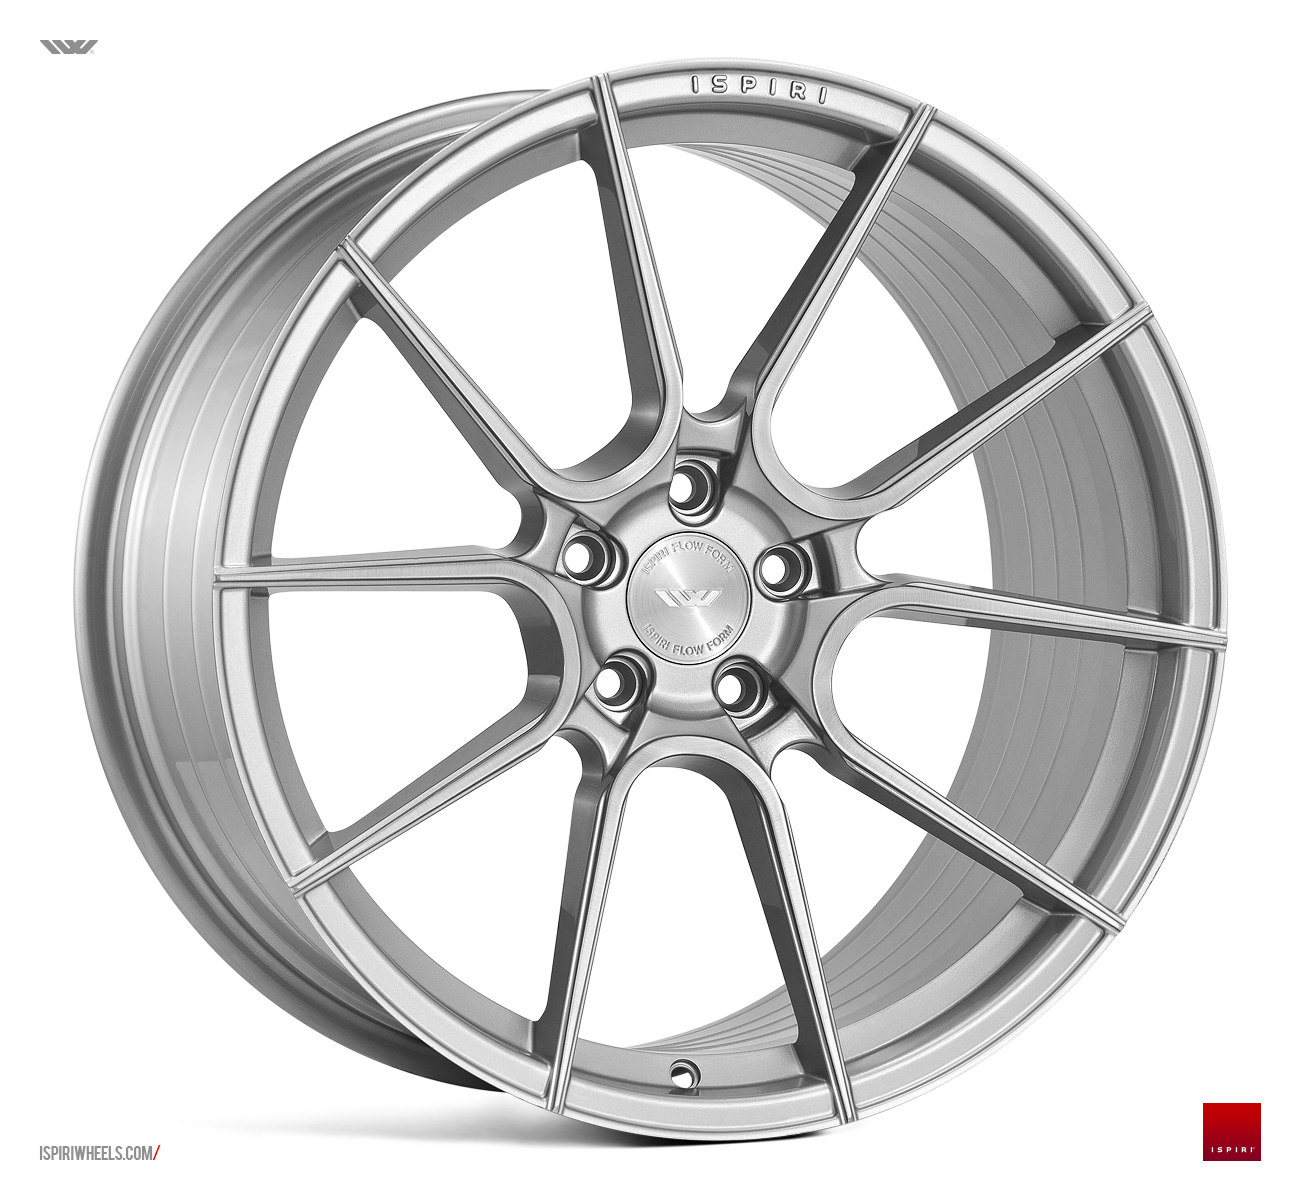 NEW 20  ISPIRI FFR6 TWIN 5 SPOKE ALLOY WHEELS IN PURE SILVER BRUSHED  VARIOUS FITMENTS AVAILABLE